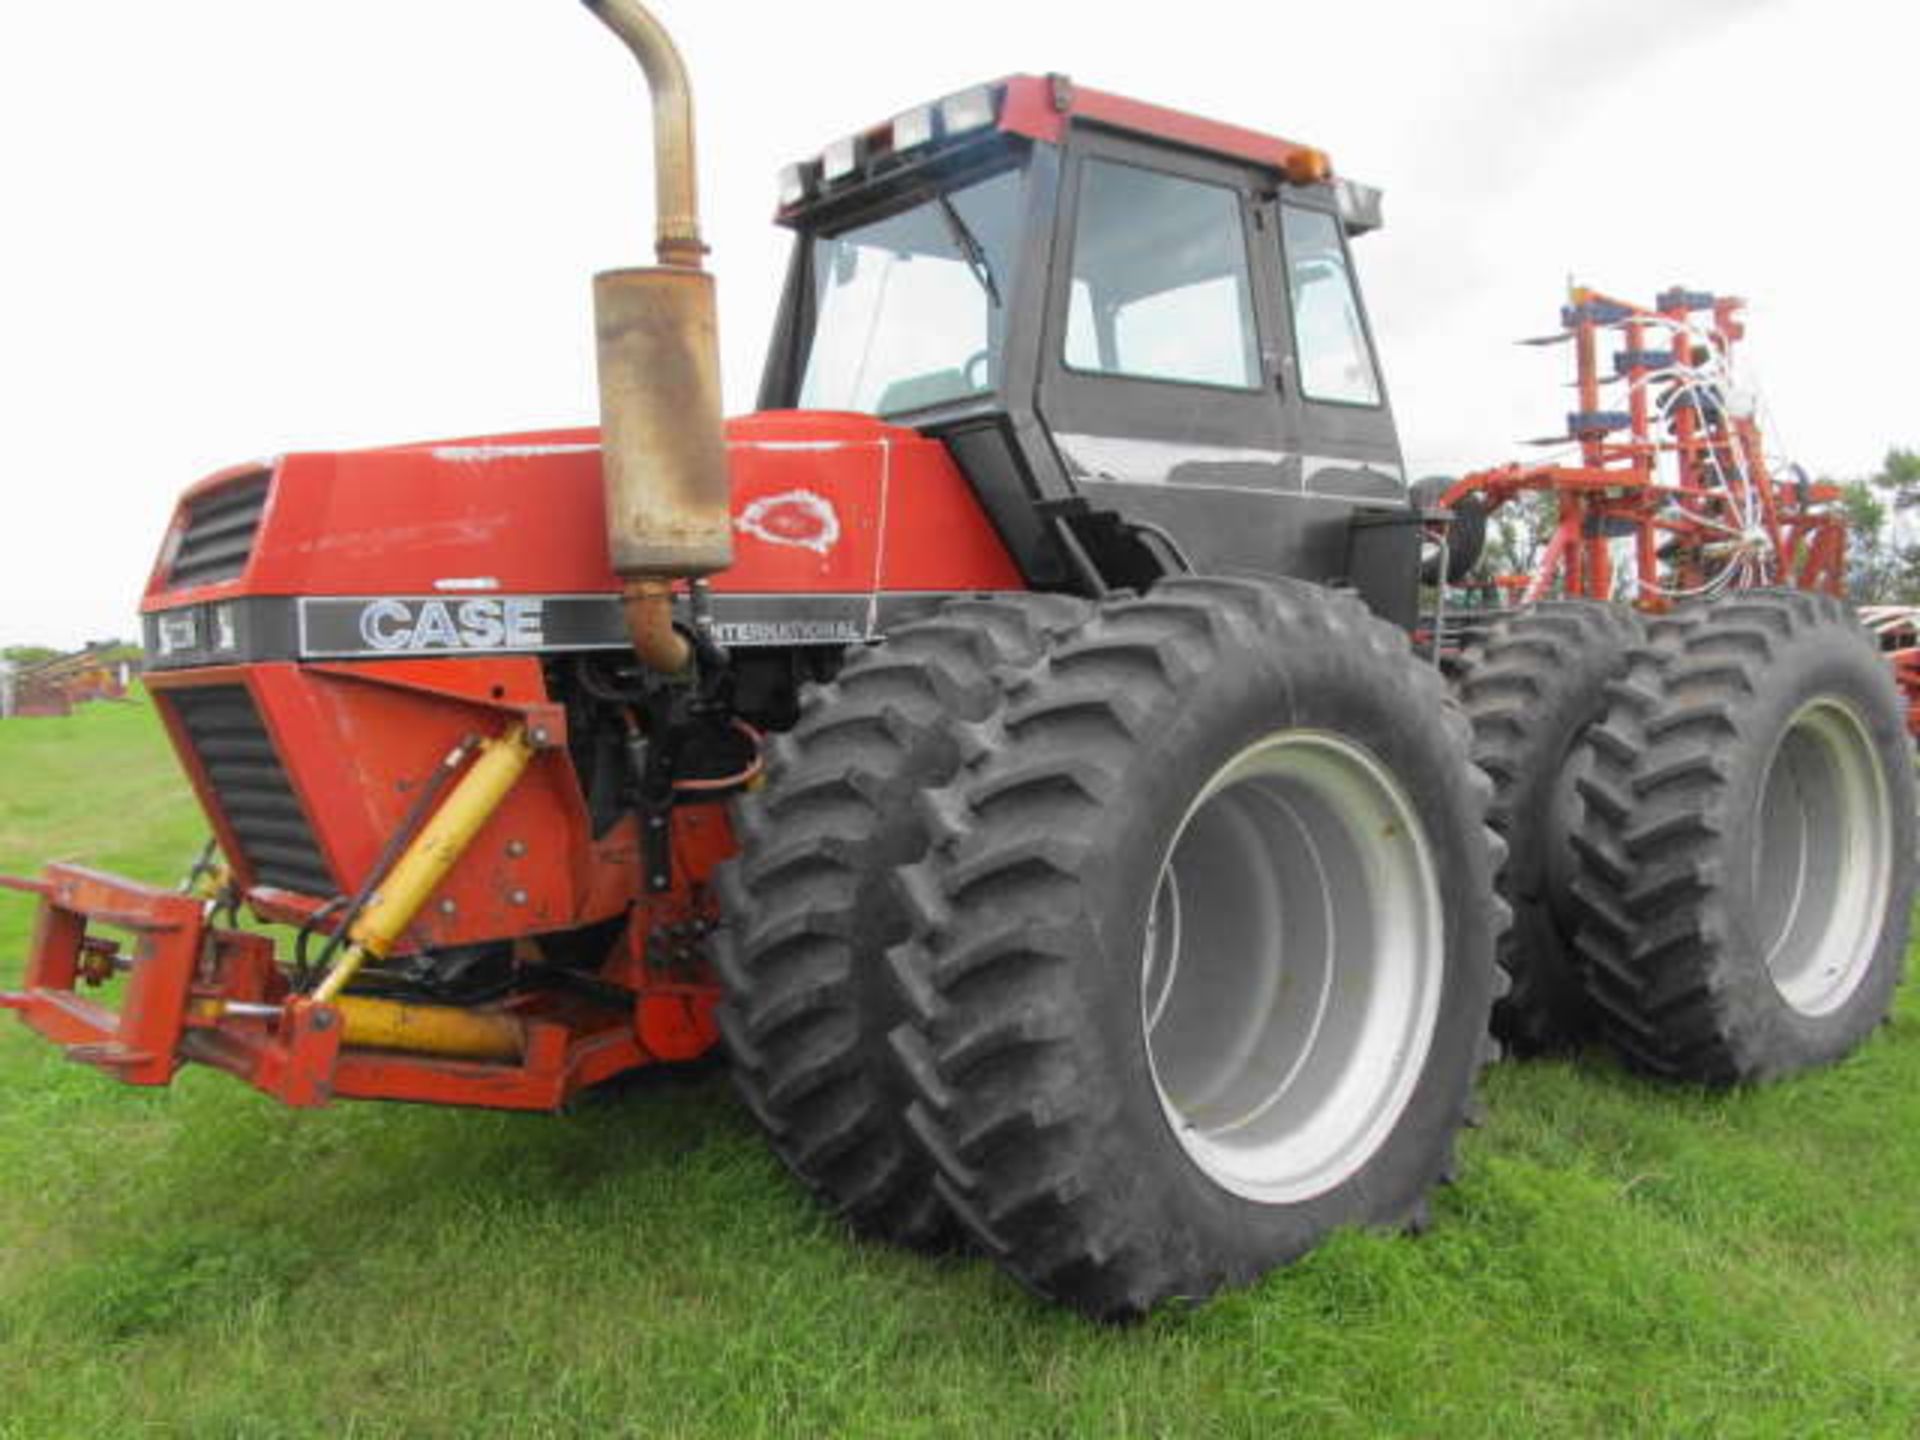 CASE IH 4494 4WD TRACTOR; 7860 Hours, Powershift, PTO, Leon 6 Way 14 Ft Blade, 18.4-38 Duals, SN.